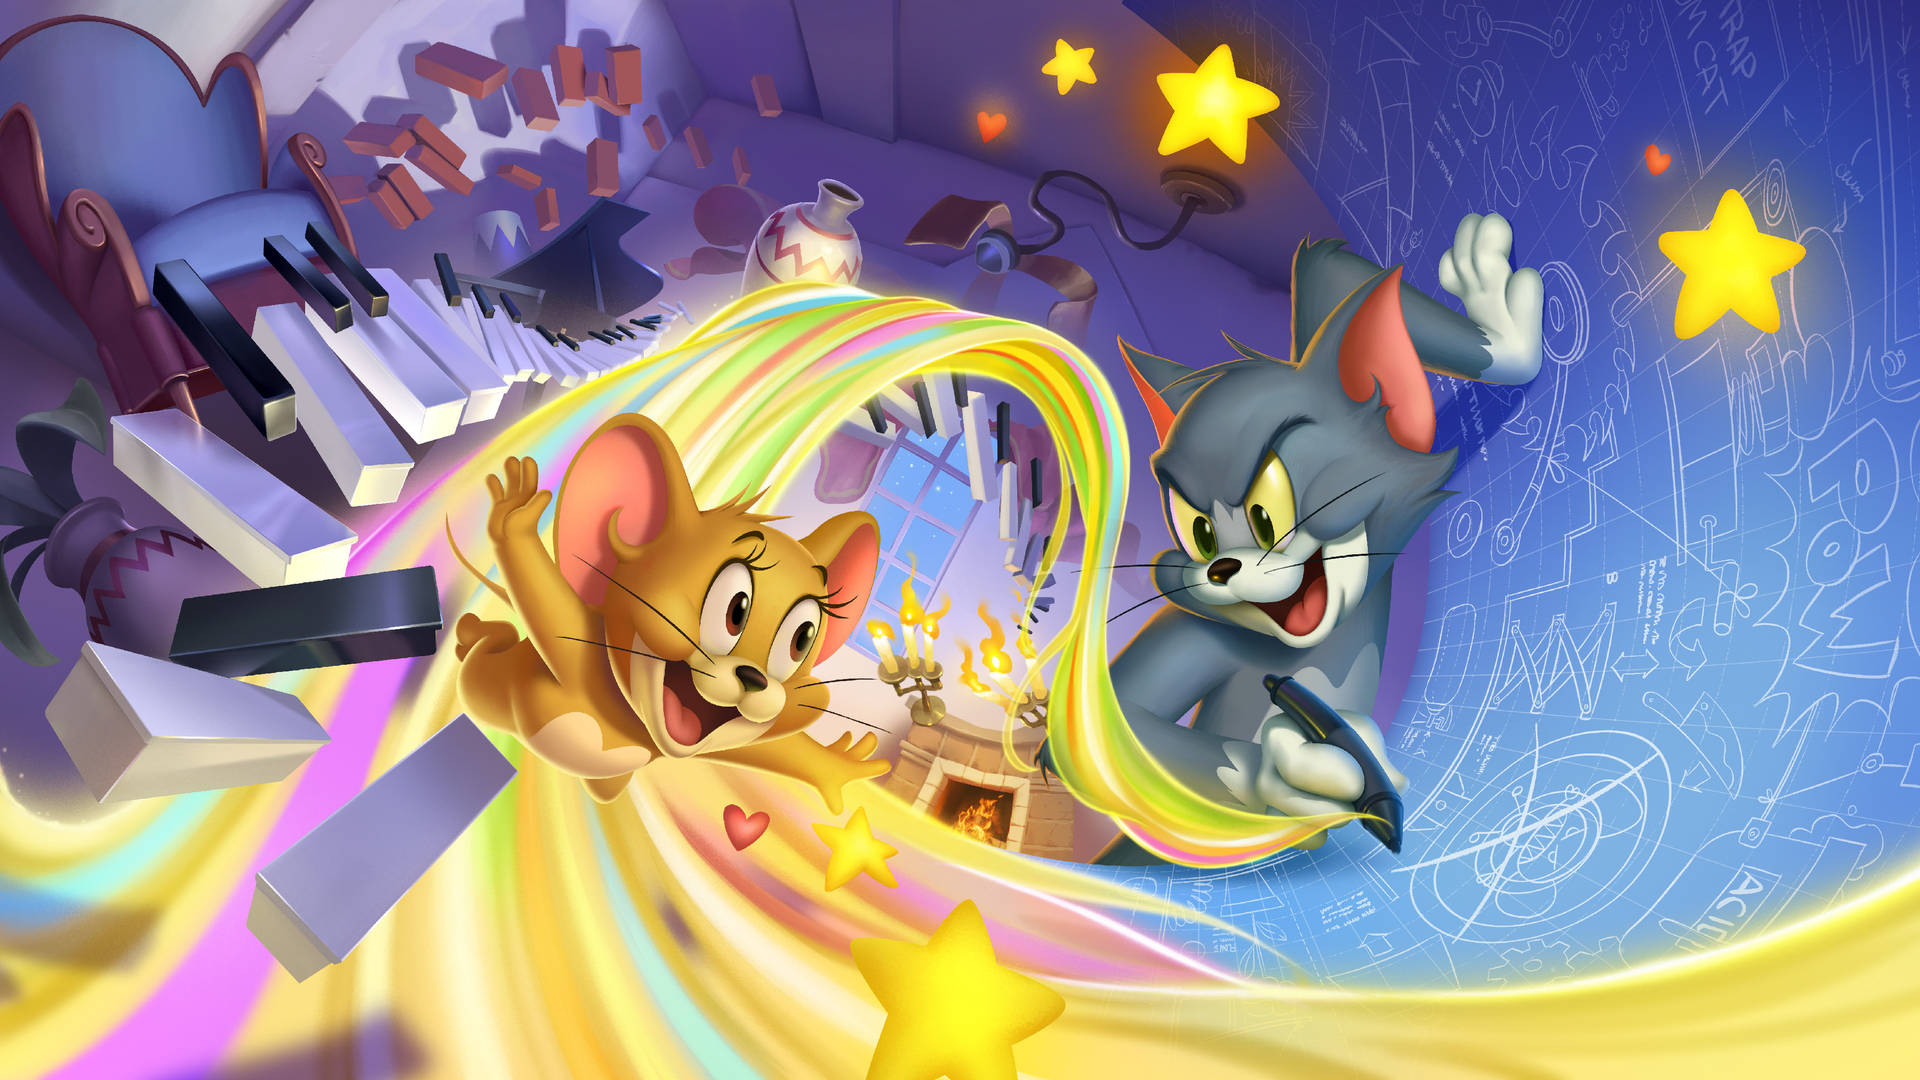 Download Colorful And 3d Tom And Jerry Aesthetic Wallpaper 